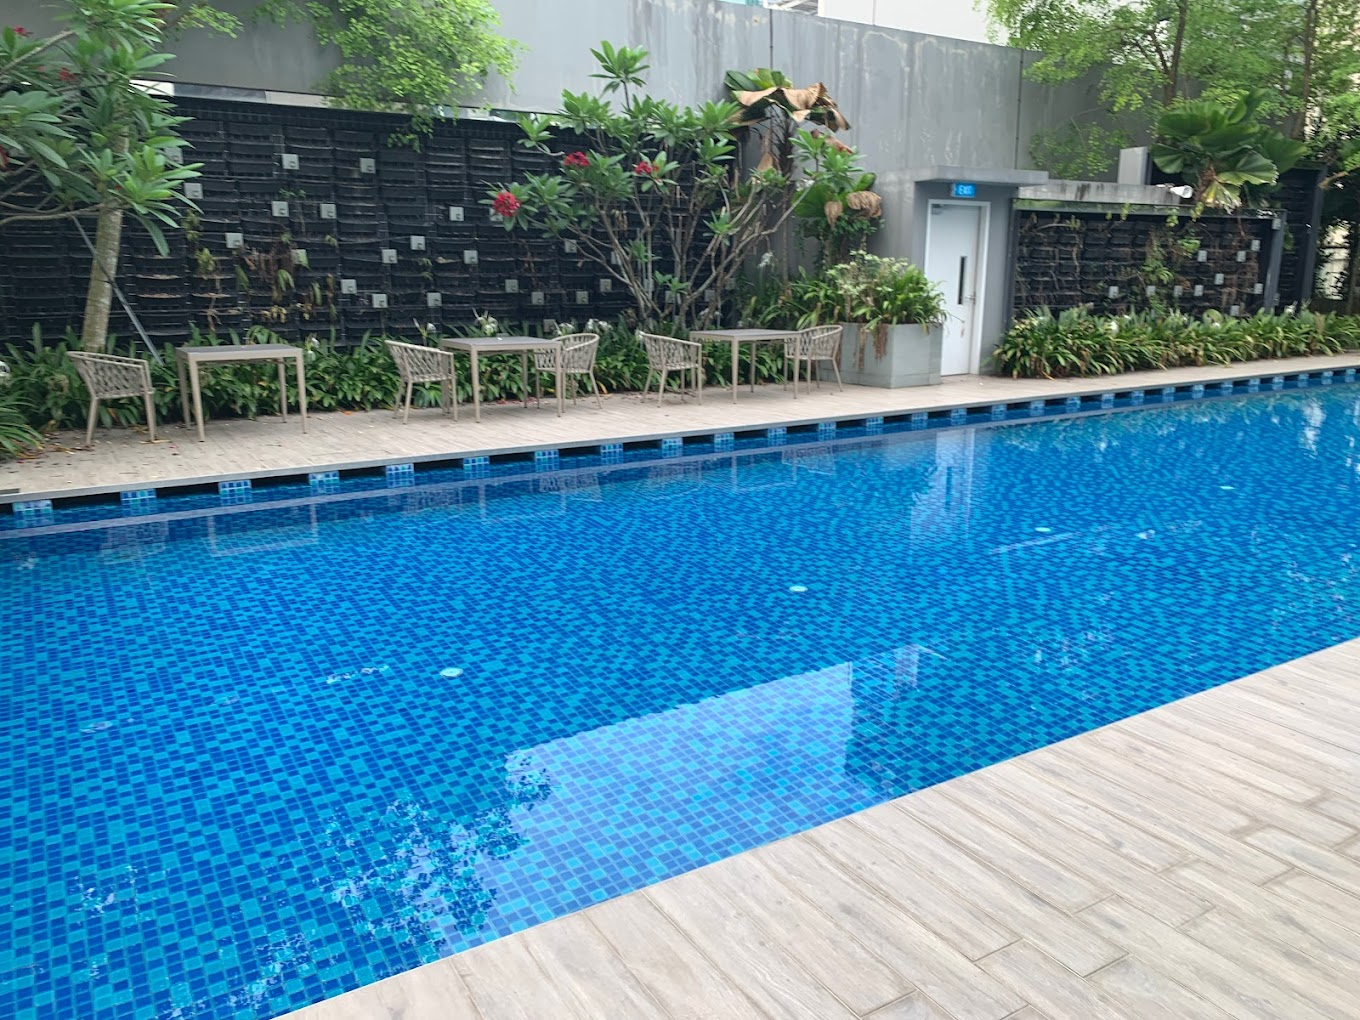 24 hour gyms - msfit gym rooftop pool